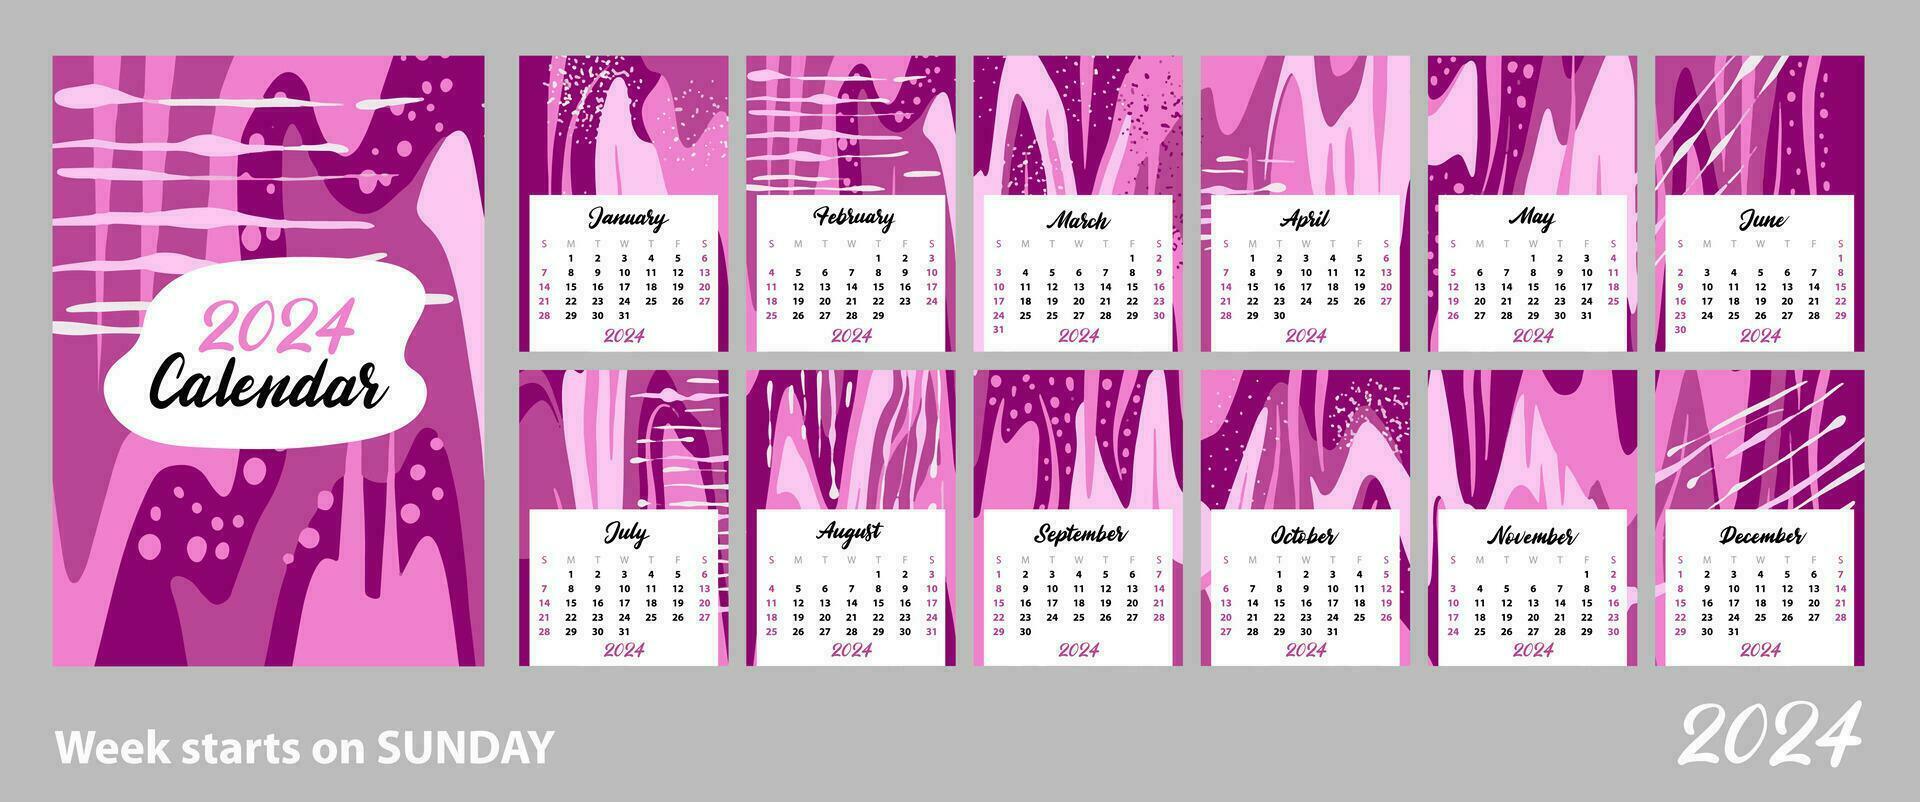 Abstract calendar of 2024. Bright pink spots and waves. The week starts on Sunday. Layout for printing A4,A5 vector